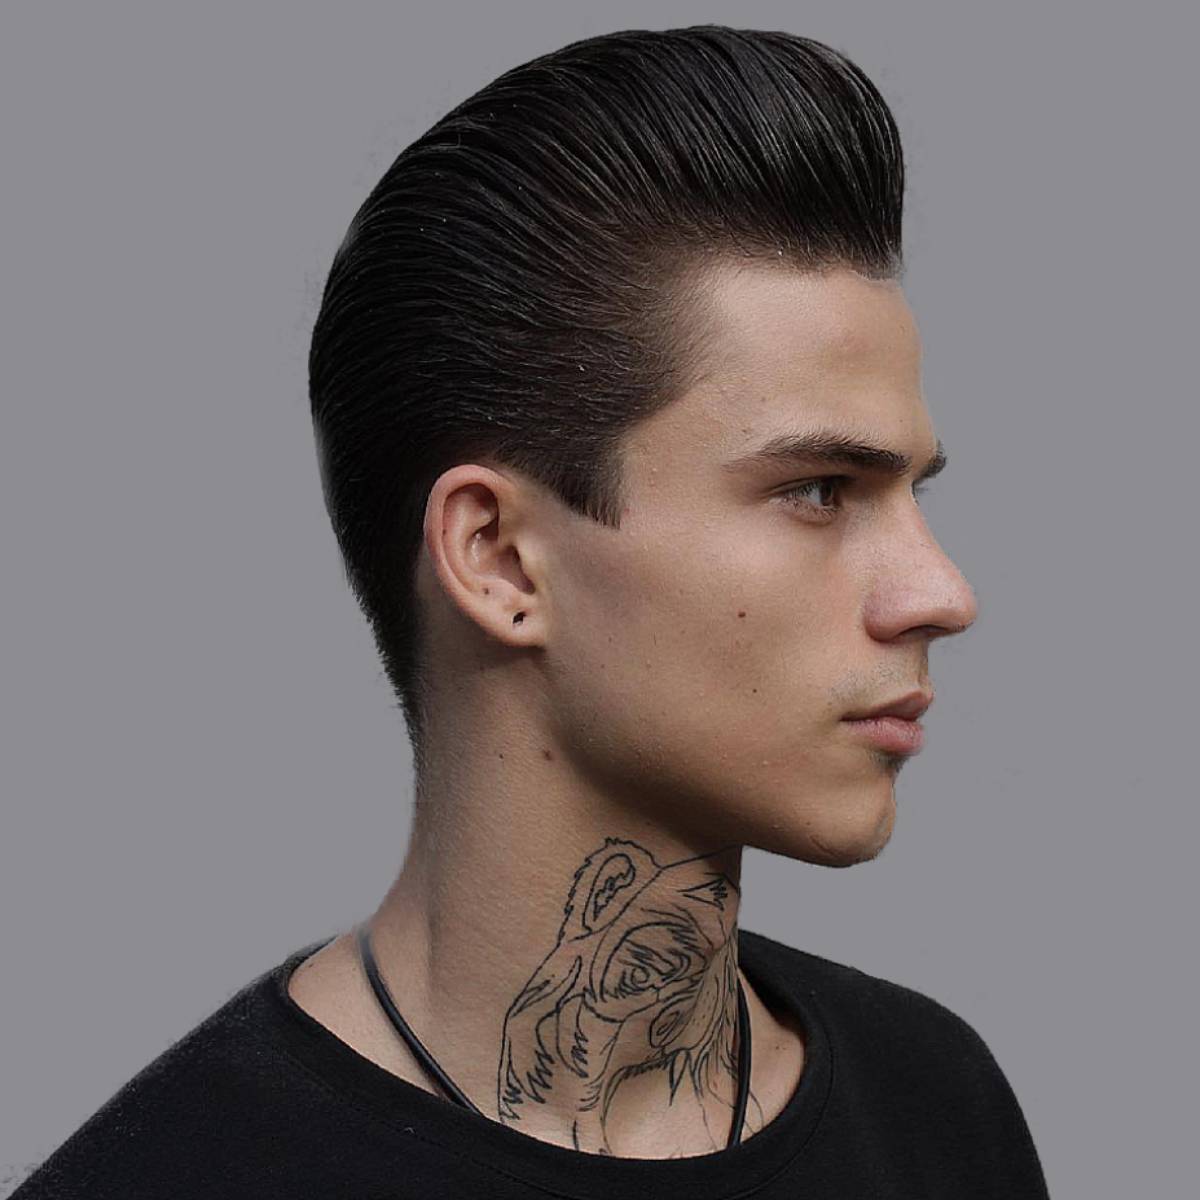 The 54 Coolest Pompadour Haircuts for Men Blowin' Up Right Now